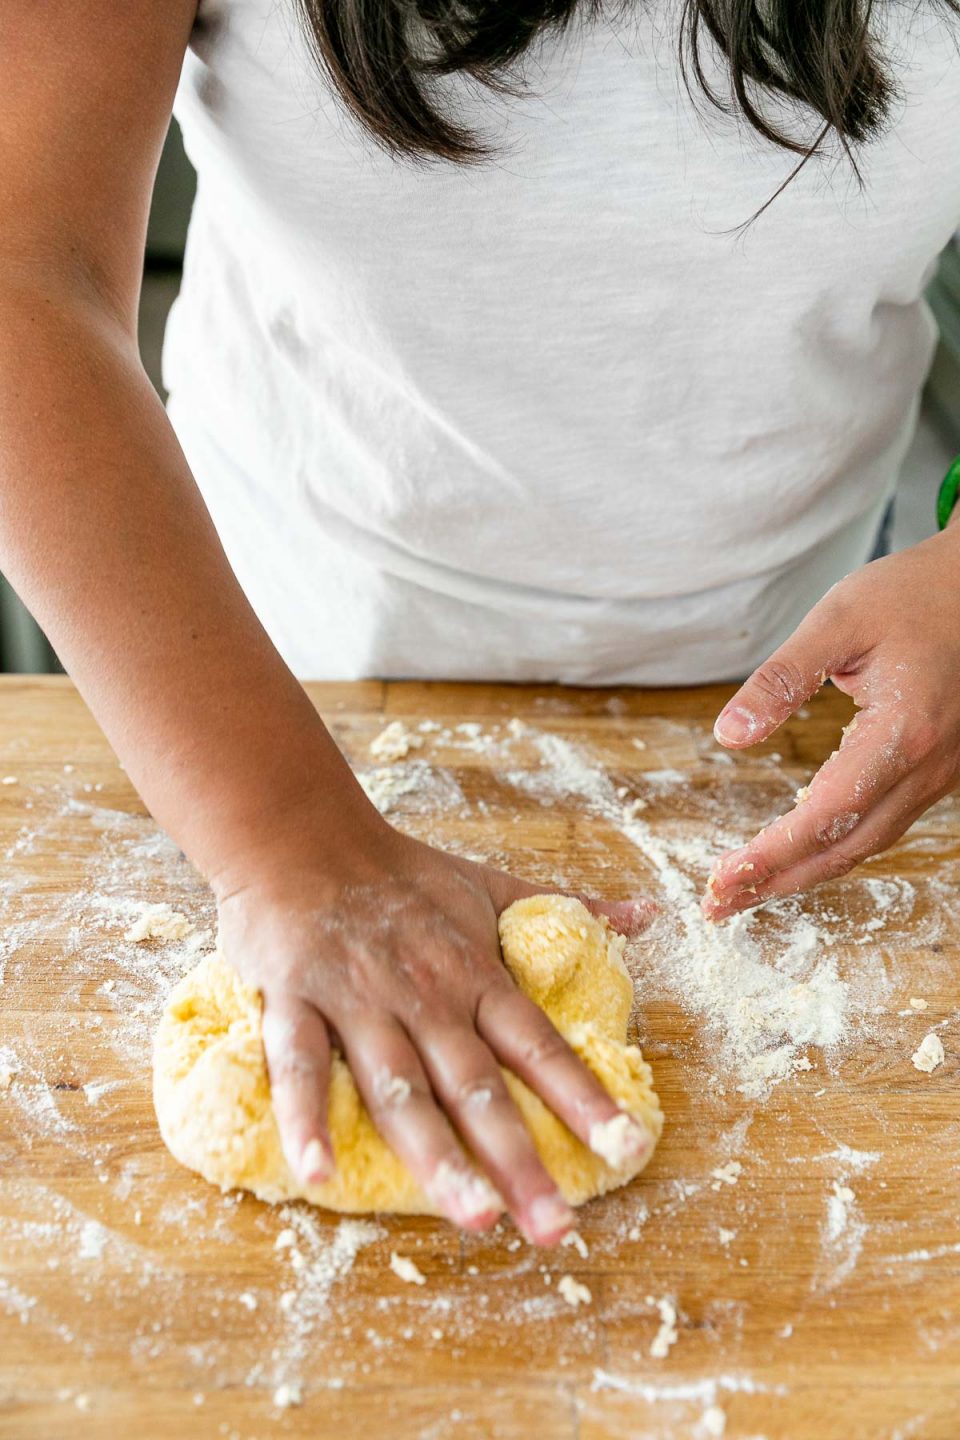 How to Make Homemade Pasta, Step 3: Knead the Pasta Dough. Jess of Plays Well With Butter uses her hands to knead the fresh pasta dough ball. The ​dough ball sits atop a butcher block countertop that is dusted with flour from the process of mixing & forming the dough ball